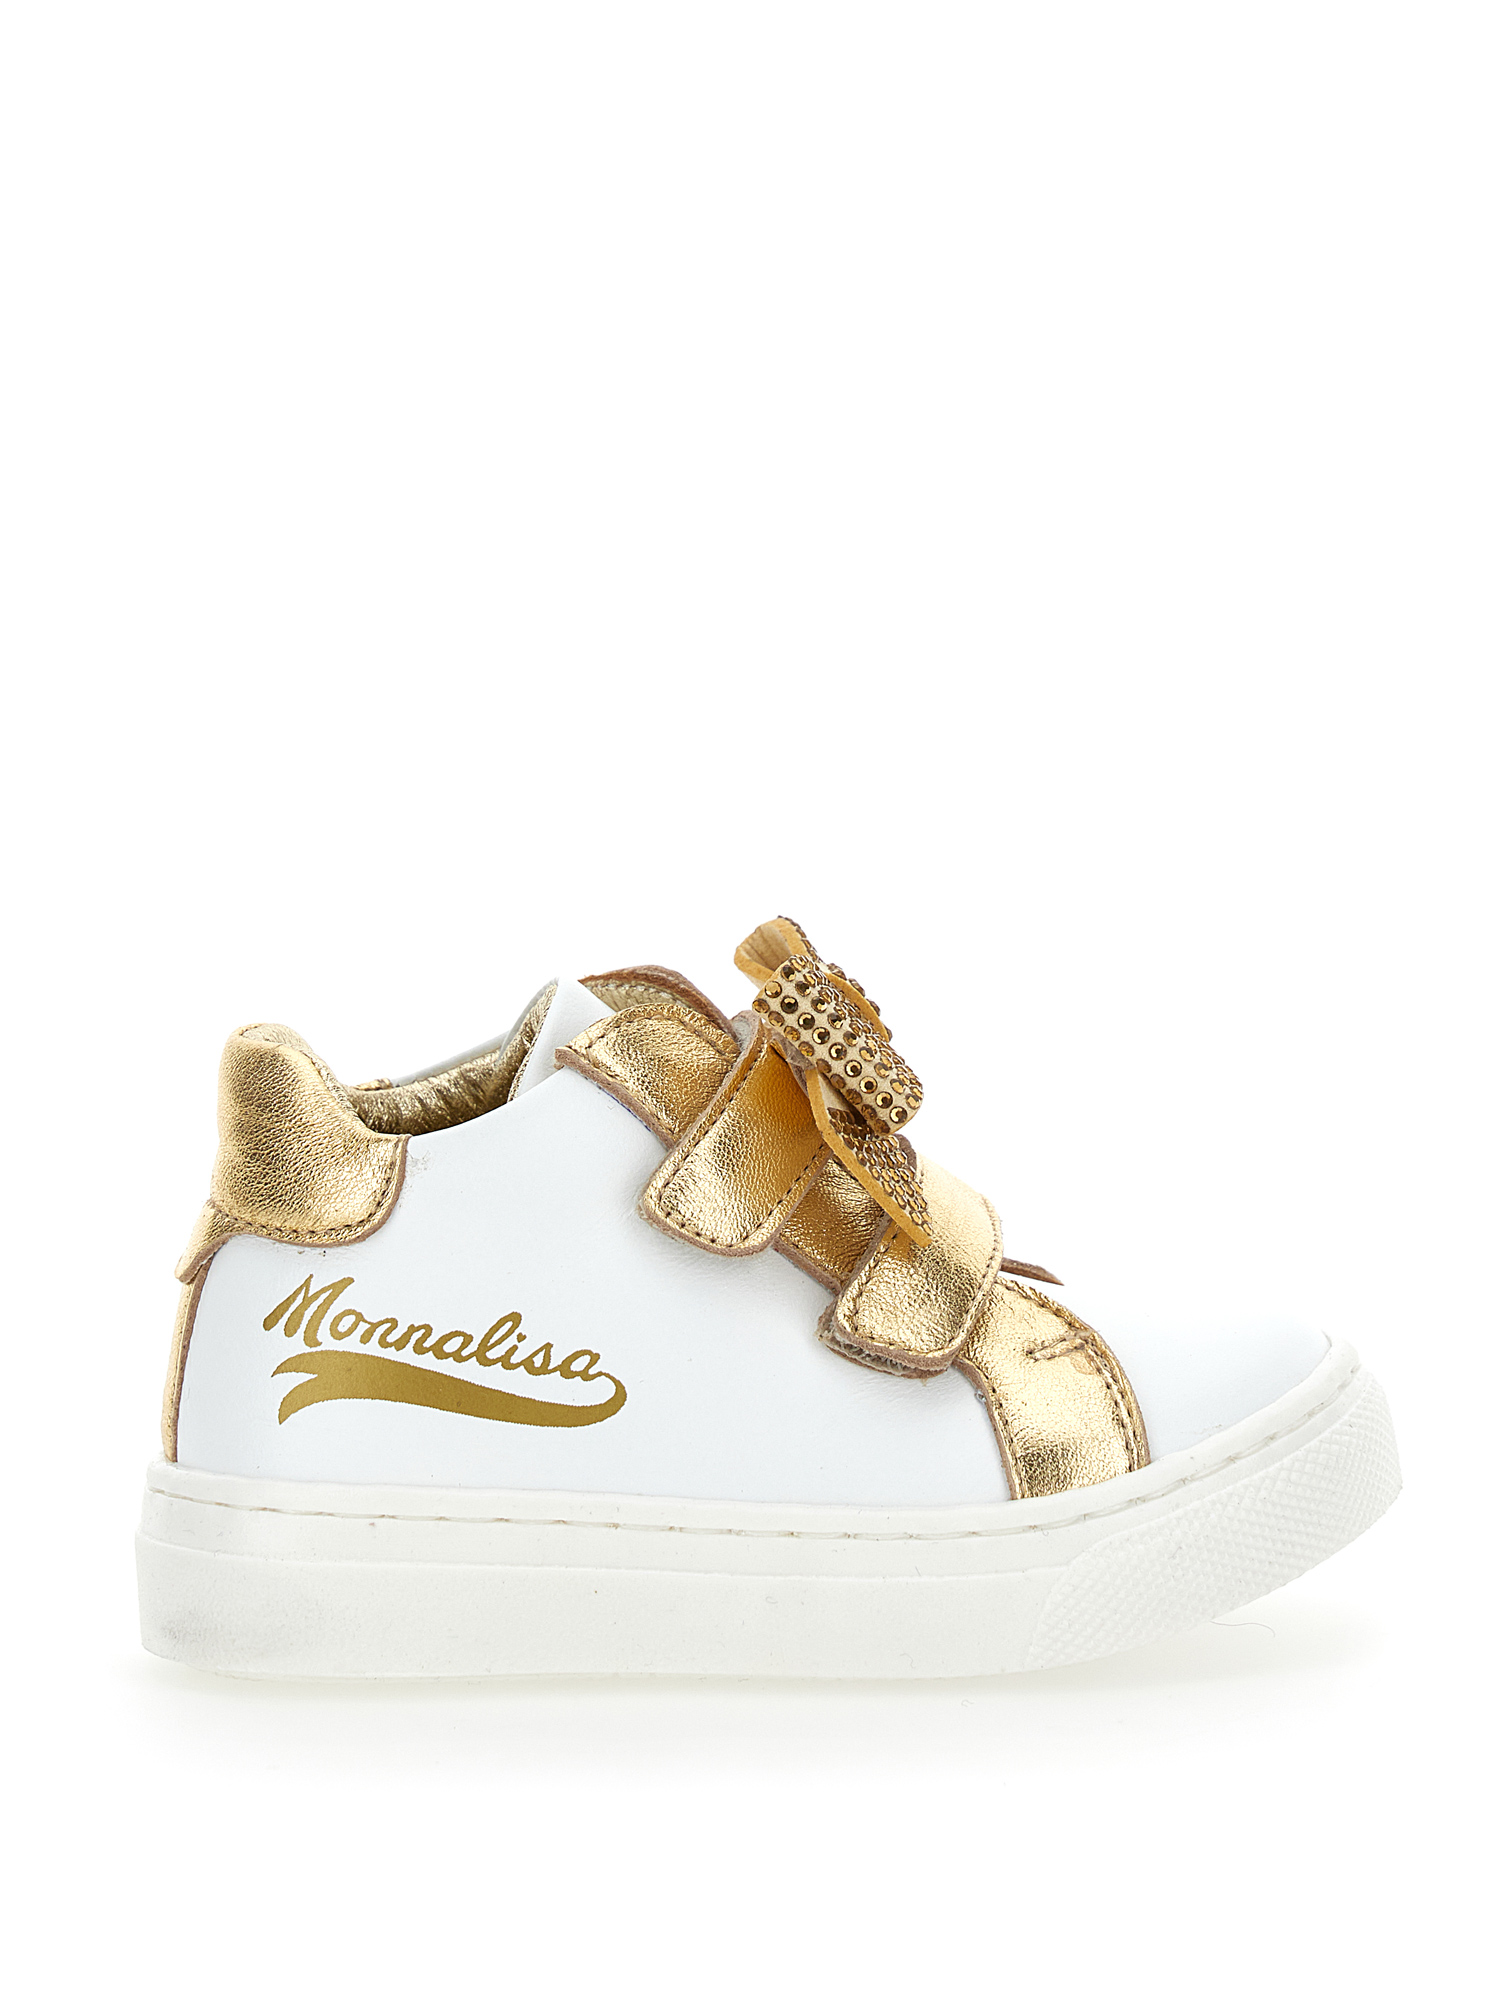 Monnalisa Two-tone Nappa Sneakers With Bow In Cream + Light Gold